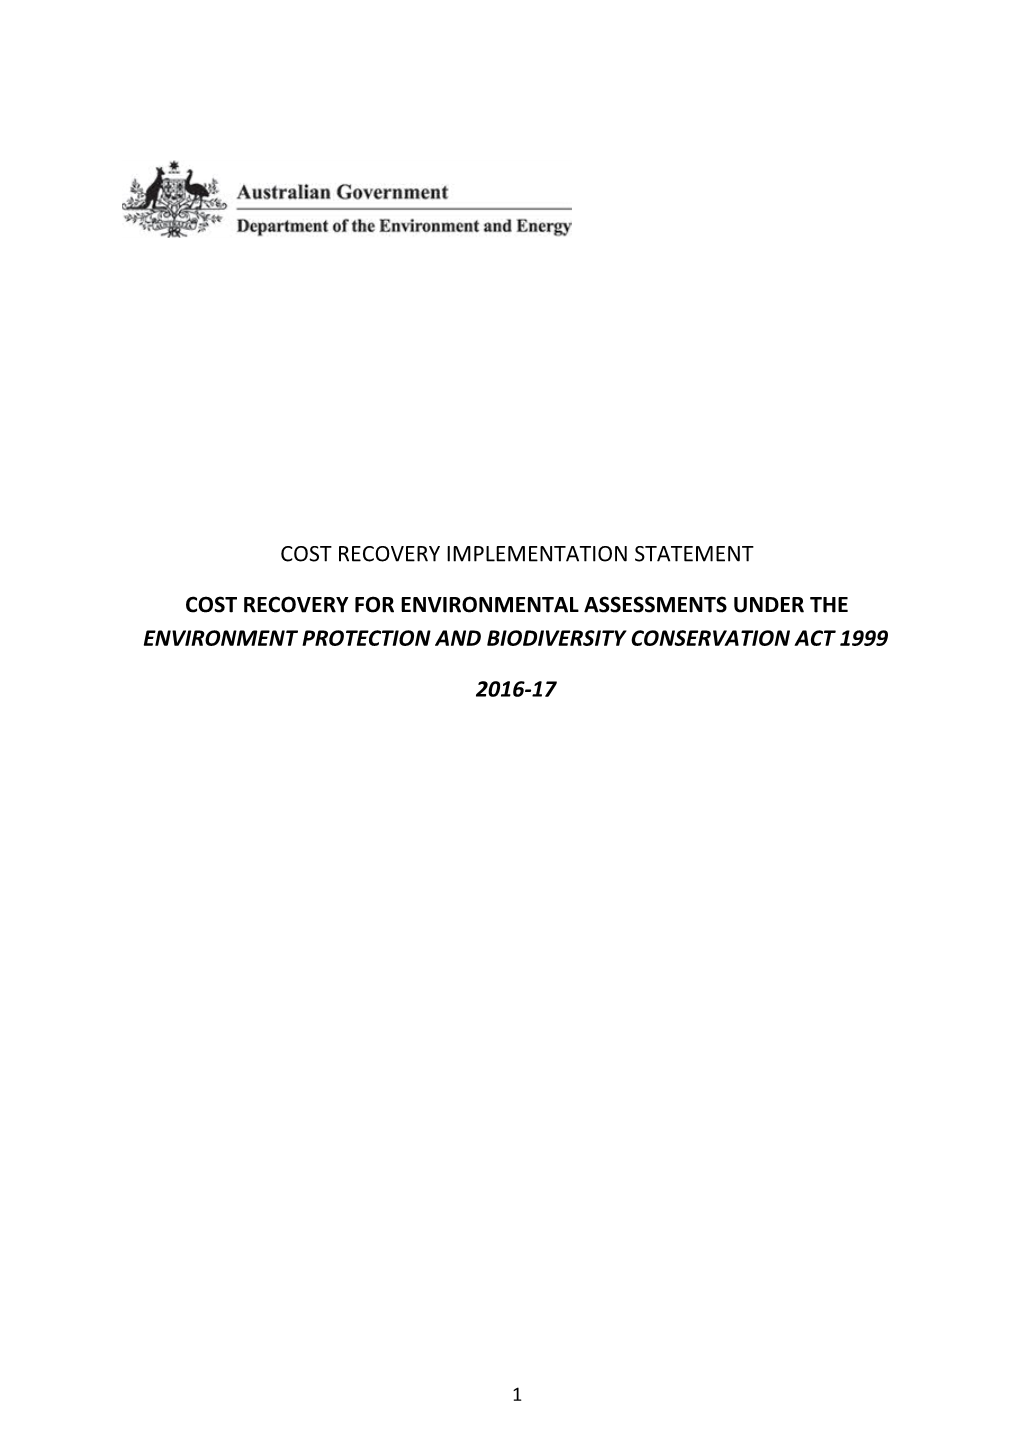 Cost Recovery Implementation Statement